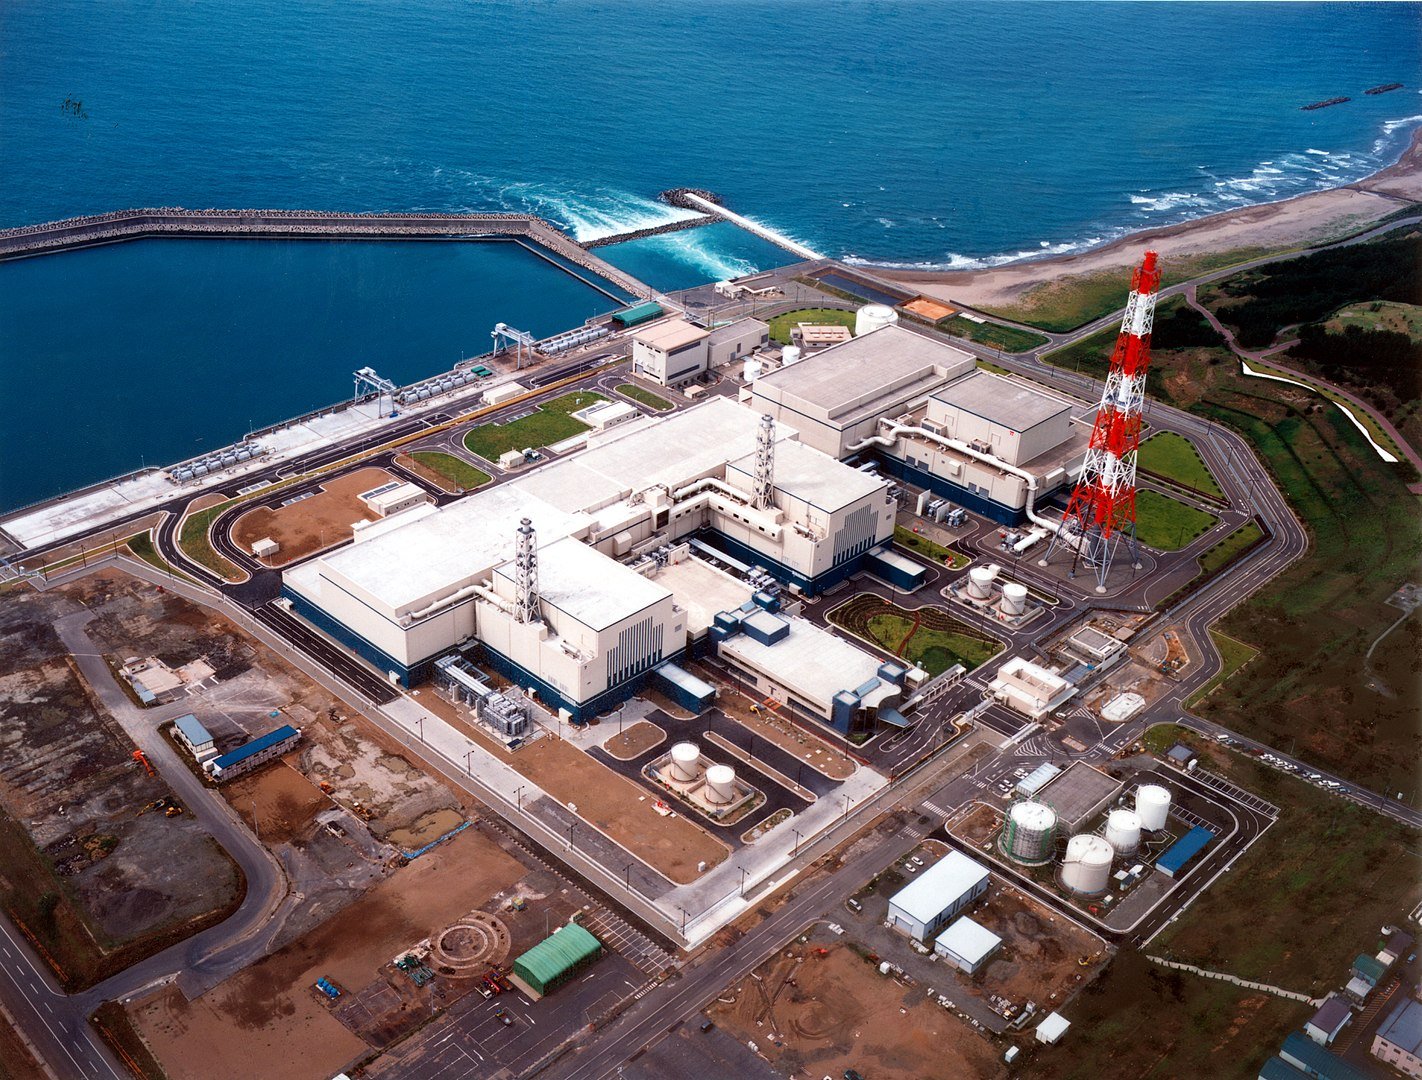 World’s biggest nuclear plant in Japan to resume path towards restart